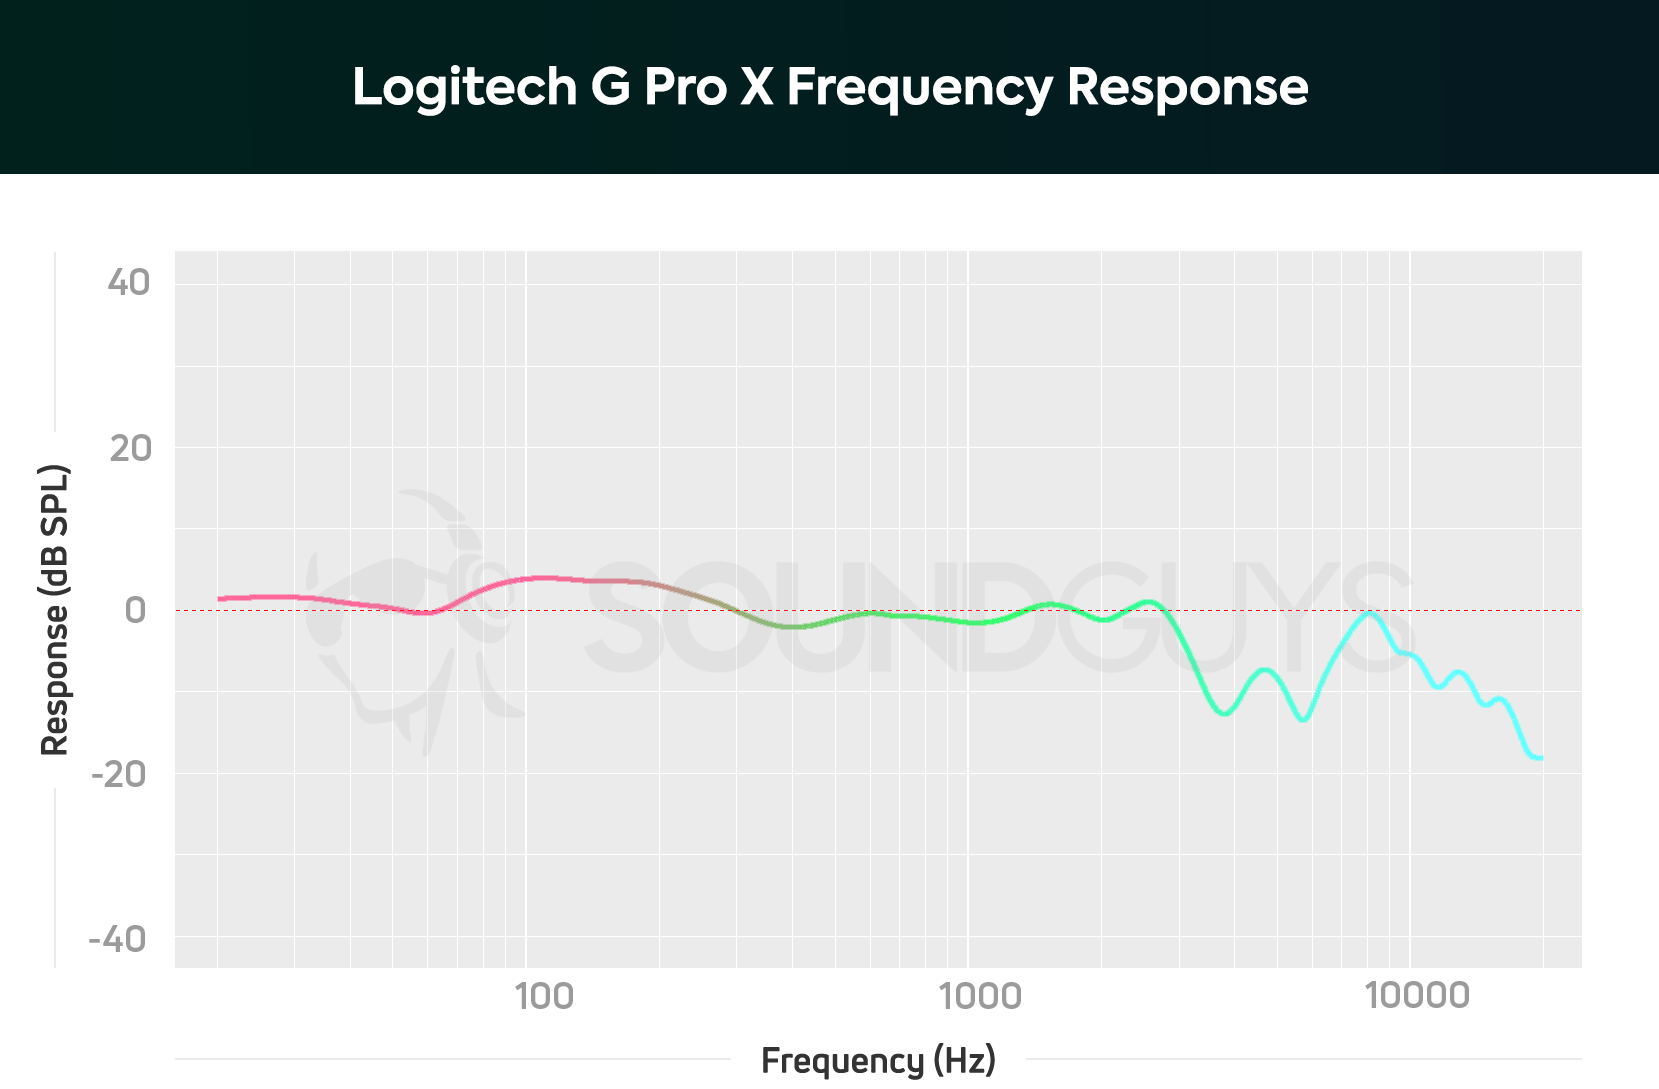 a frequency response chart for the Logitech G Pro X